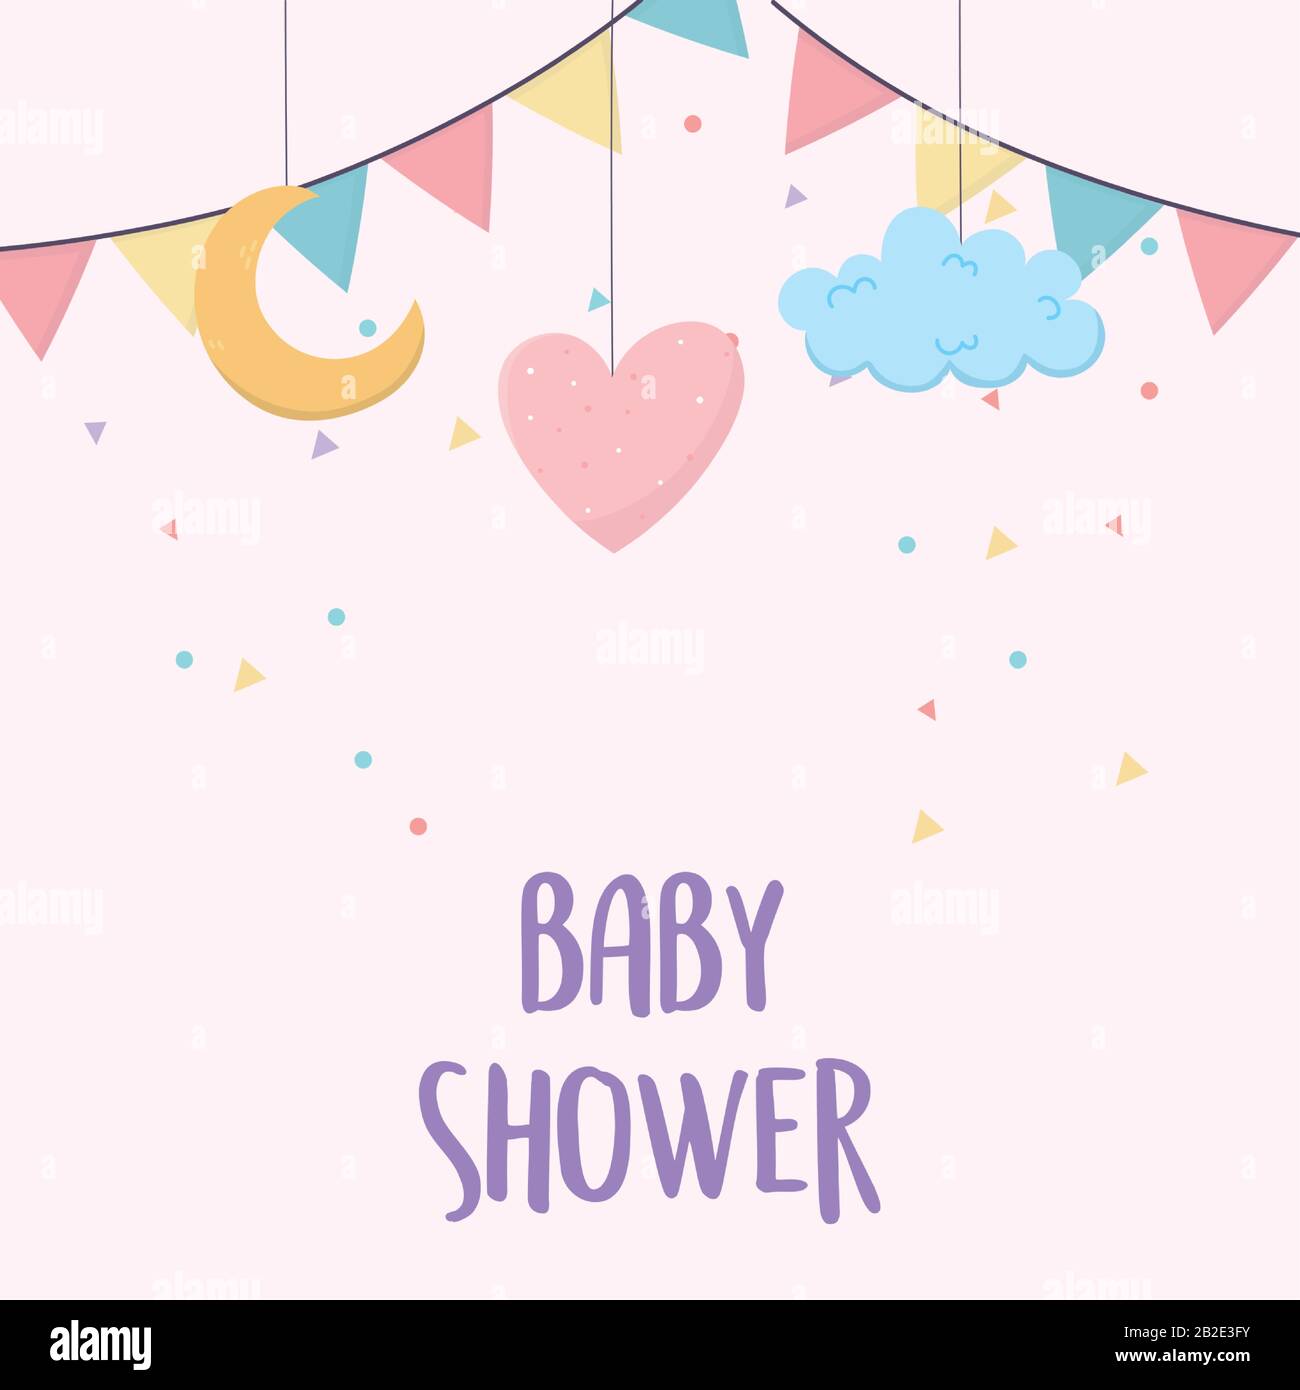 baby shower hanging heart cloud moon bunting flags card cartoon decoration vector illustration Stock Vector